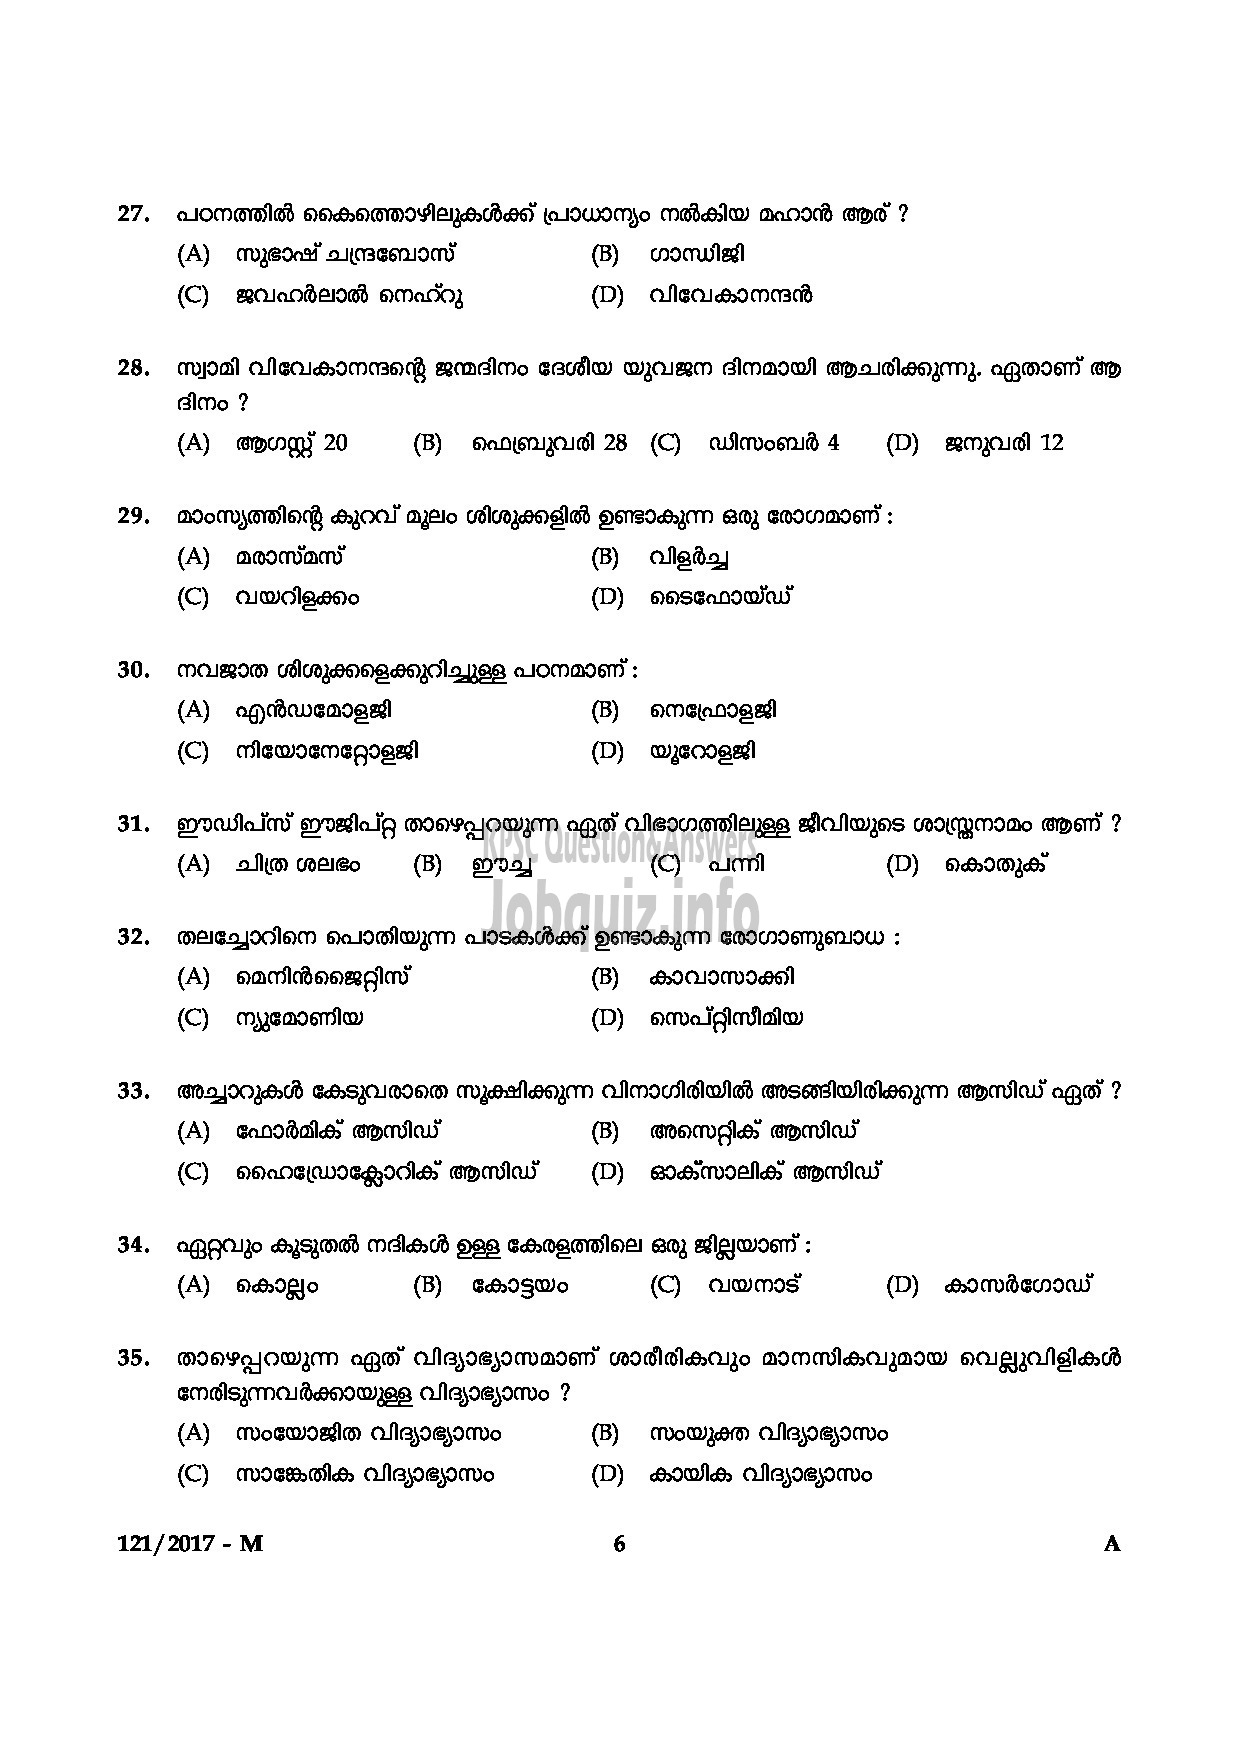 Kerala PSC Question Paper - PRE PRIMARY TEACHER EDUCATION MALAYALAM QUESTION -6